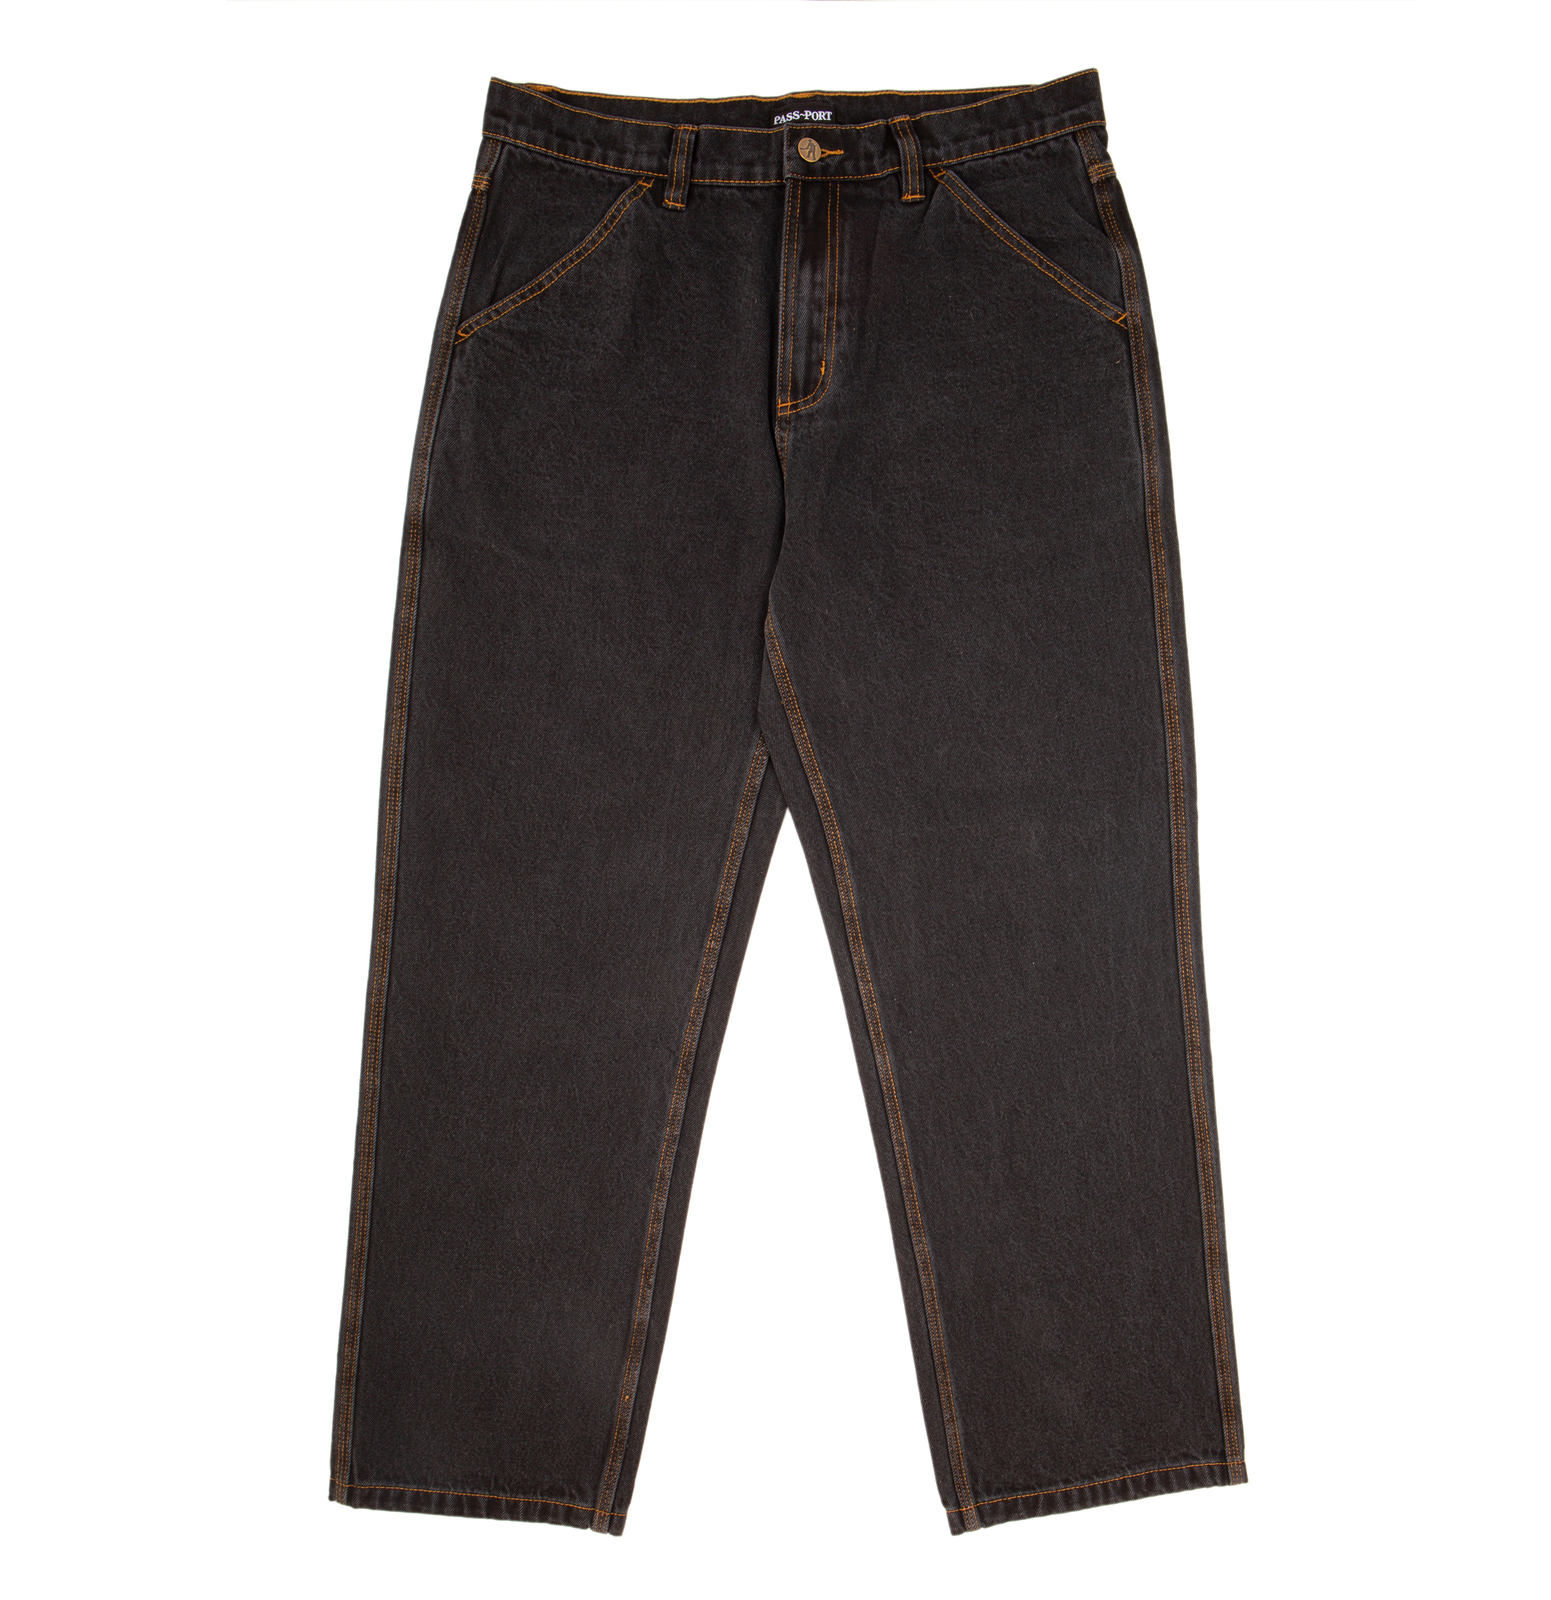 Passport Pants Workers Club Jeans Washed Black